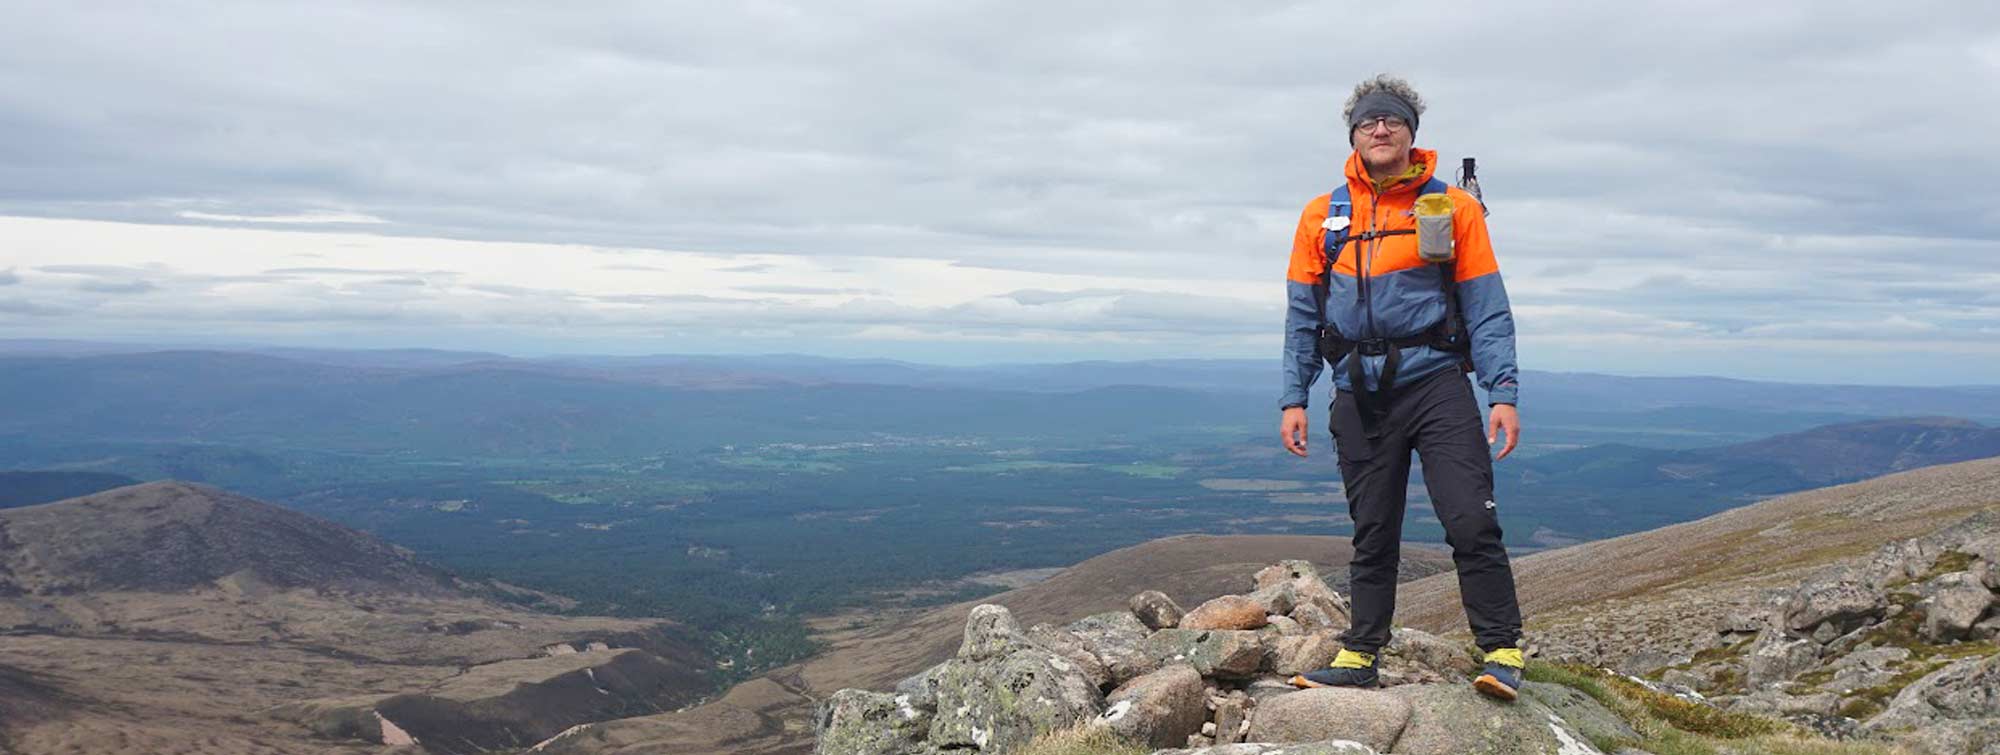 https://ultralightoutdoorgear.co.uk/product_images/uploaded_images/extrem-mtn-guide-mw-technical-pant-review-andy.jpg